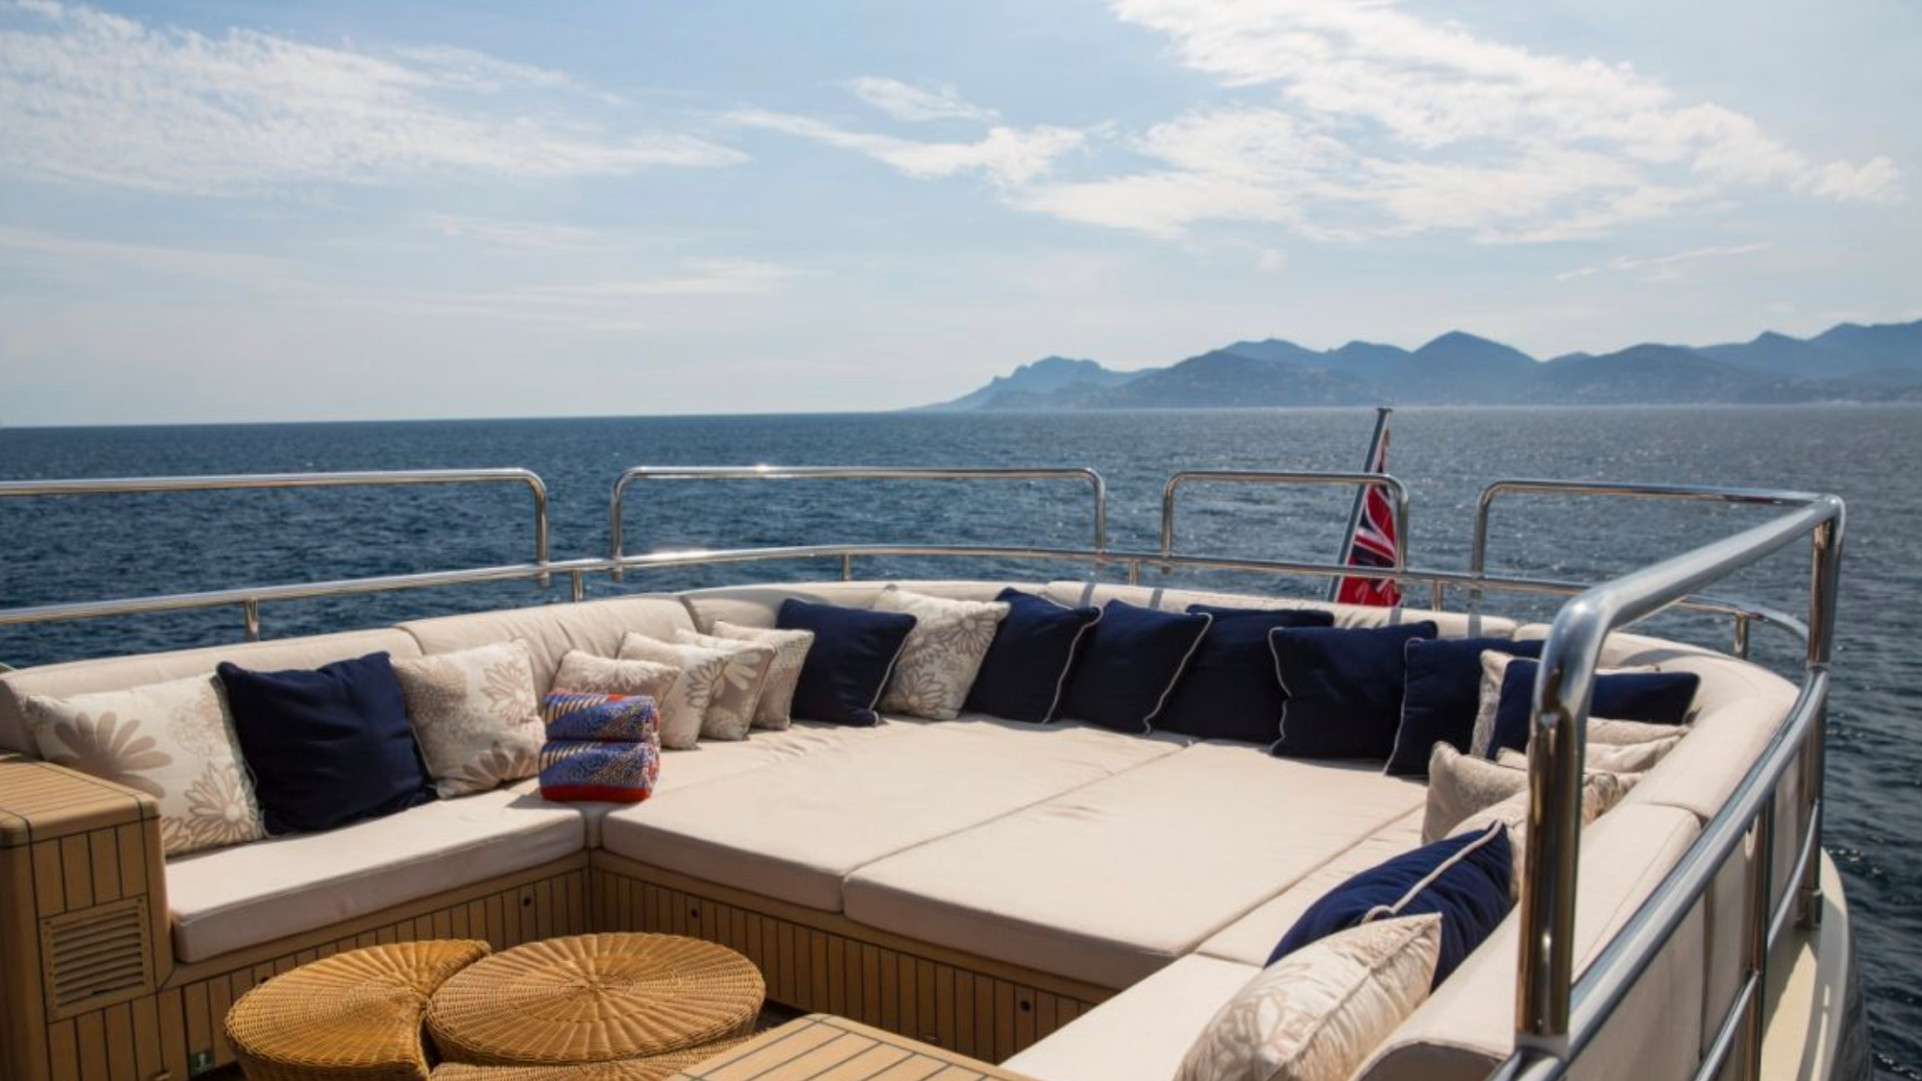 YCM 120 - Yacht Charter Saint Vincent and the Grenadines & Boat hire in Riviera, Corsica, Sardinia, Spain, Balearics, Caribbean 5